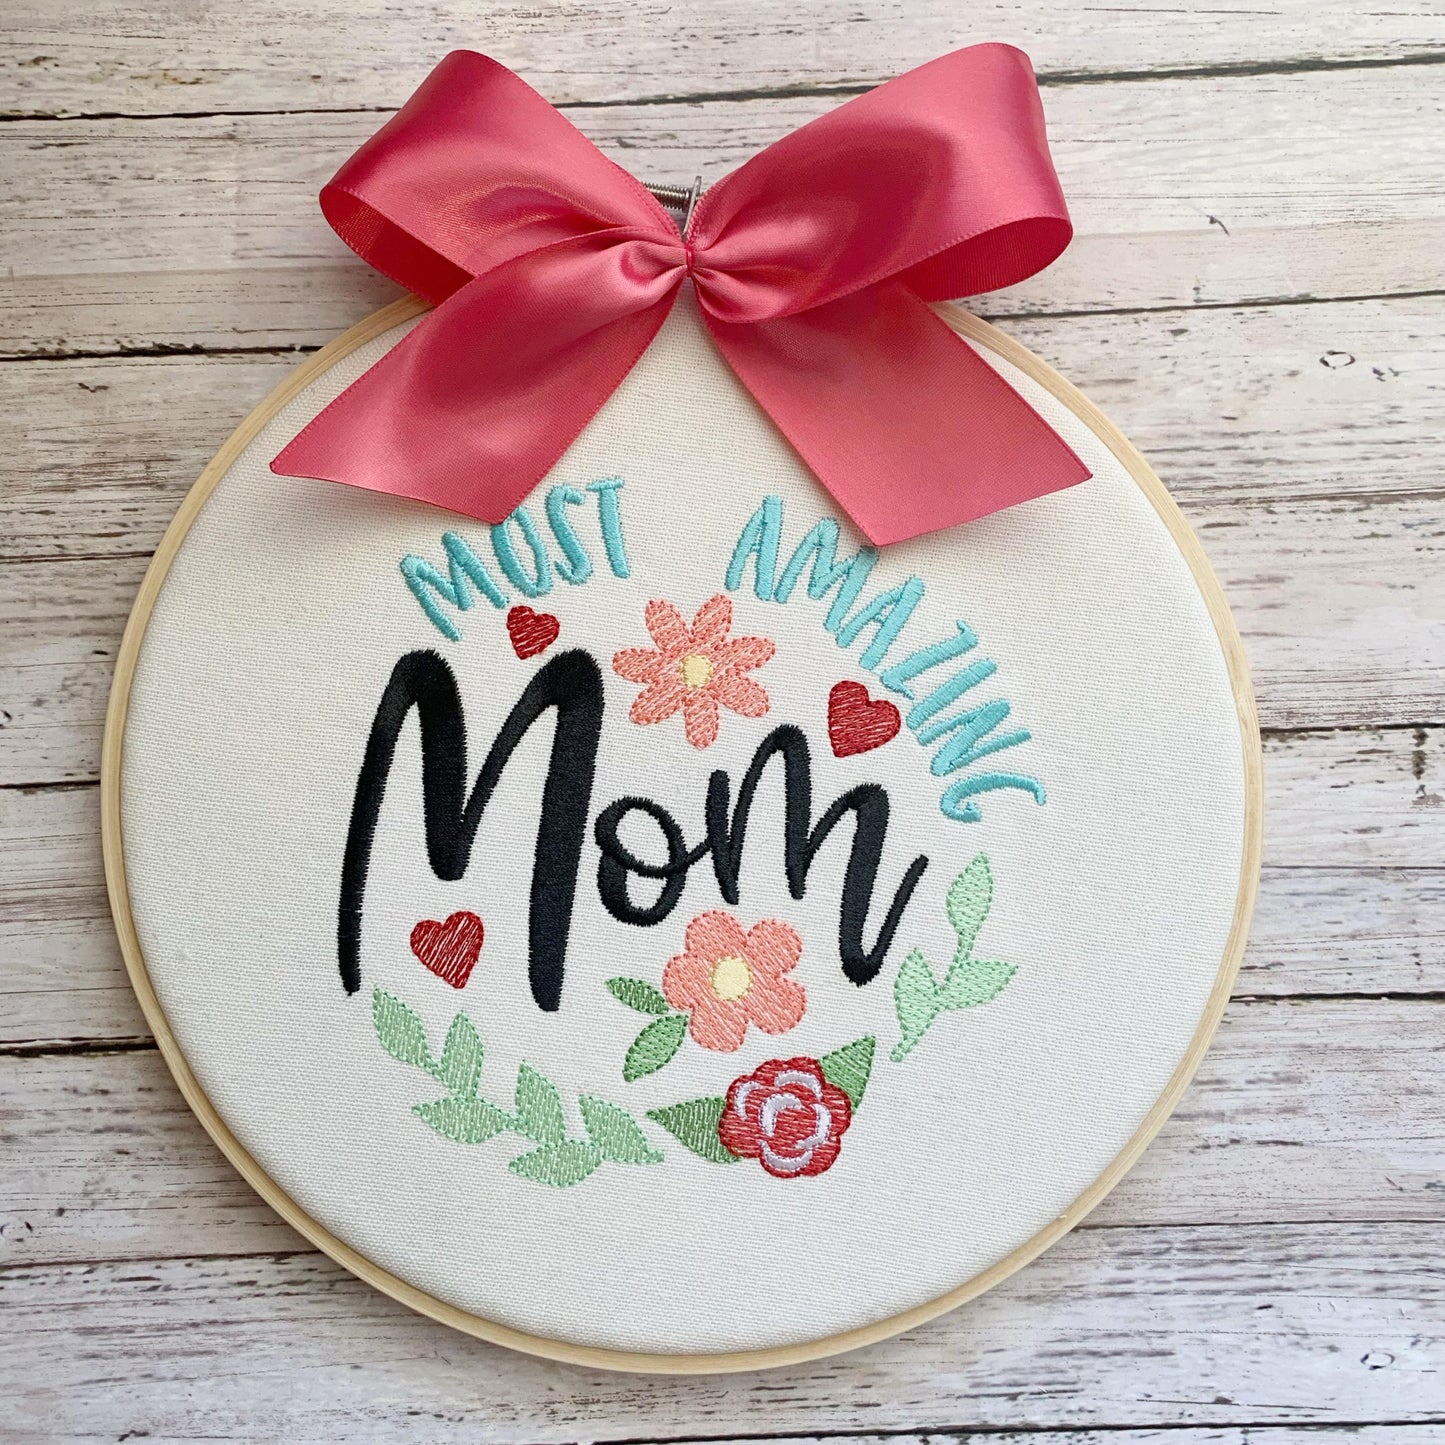 Most Amazing Mom - 3 sizes- Digital Embroidery Design